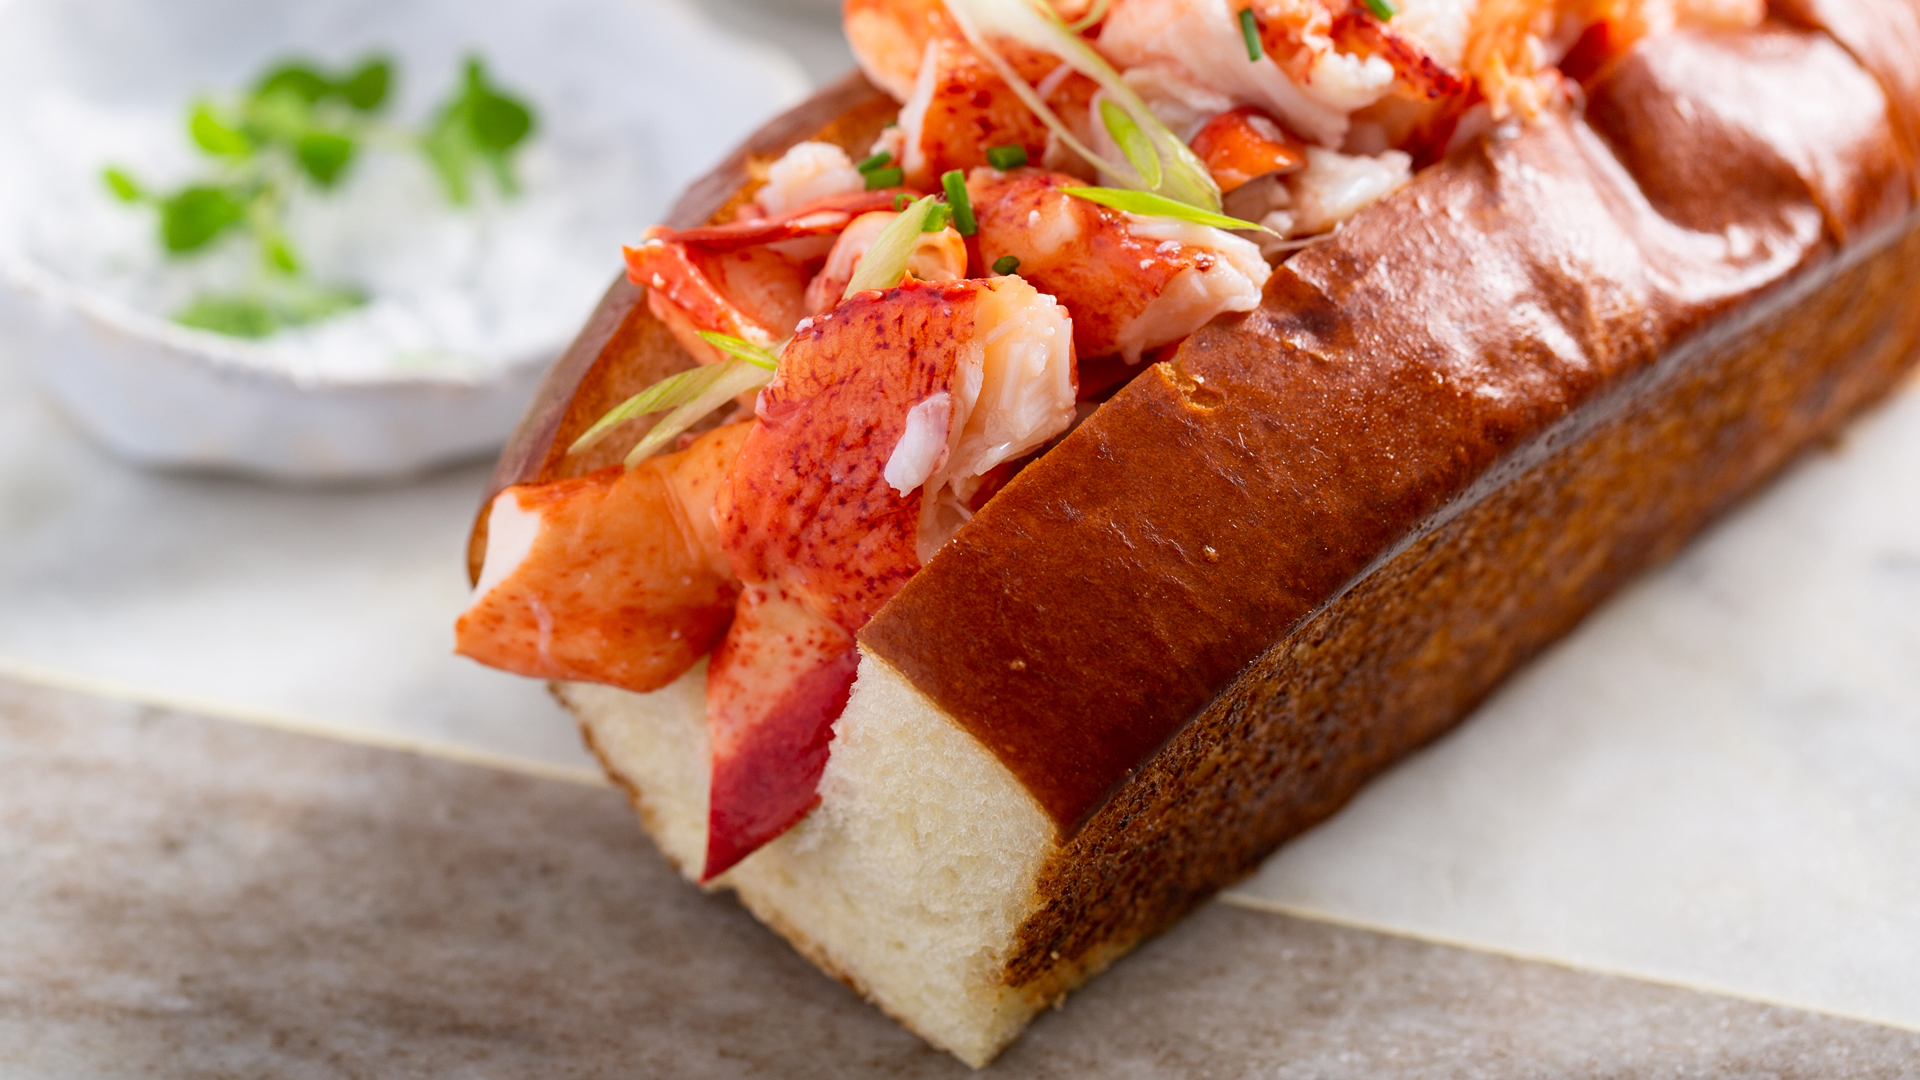 Up close photo of a warm lobster roll